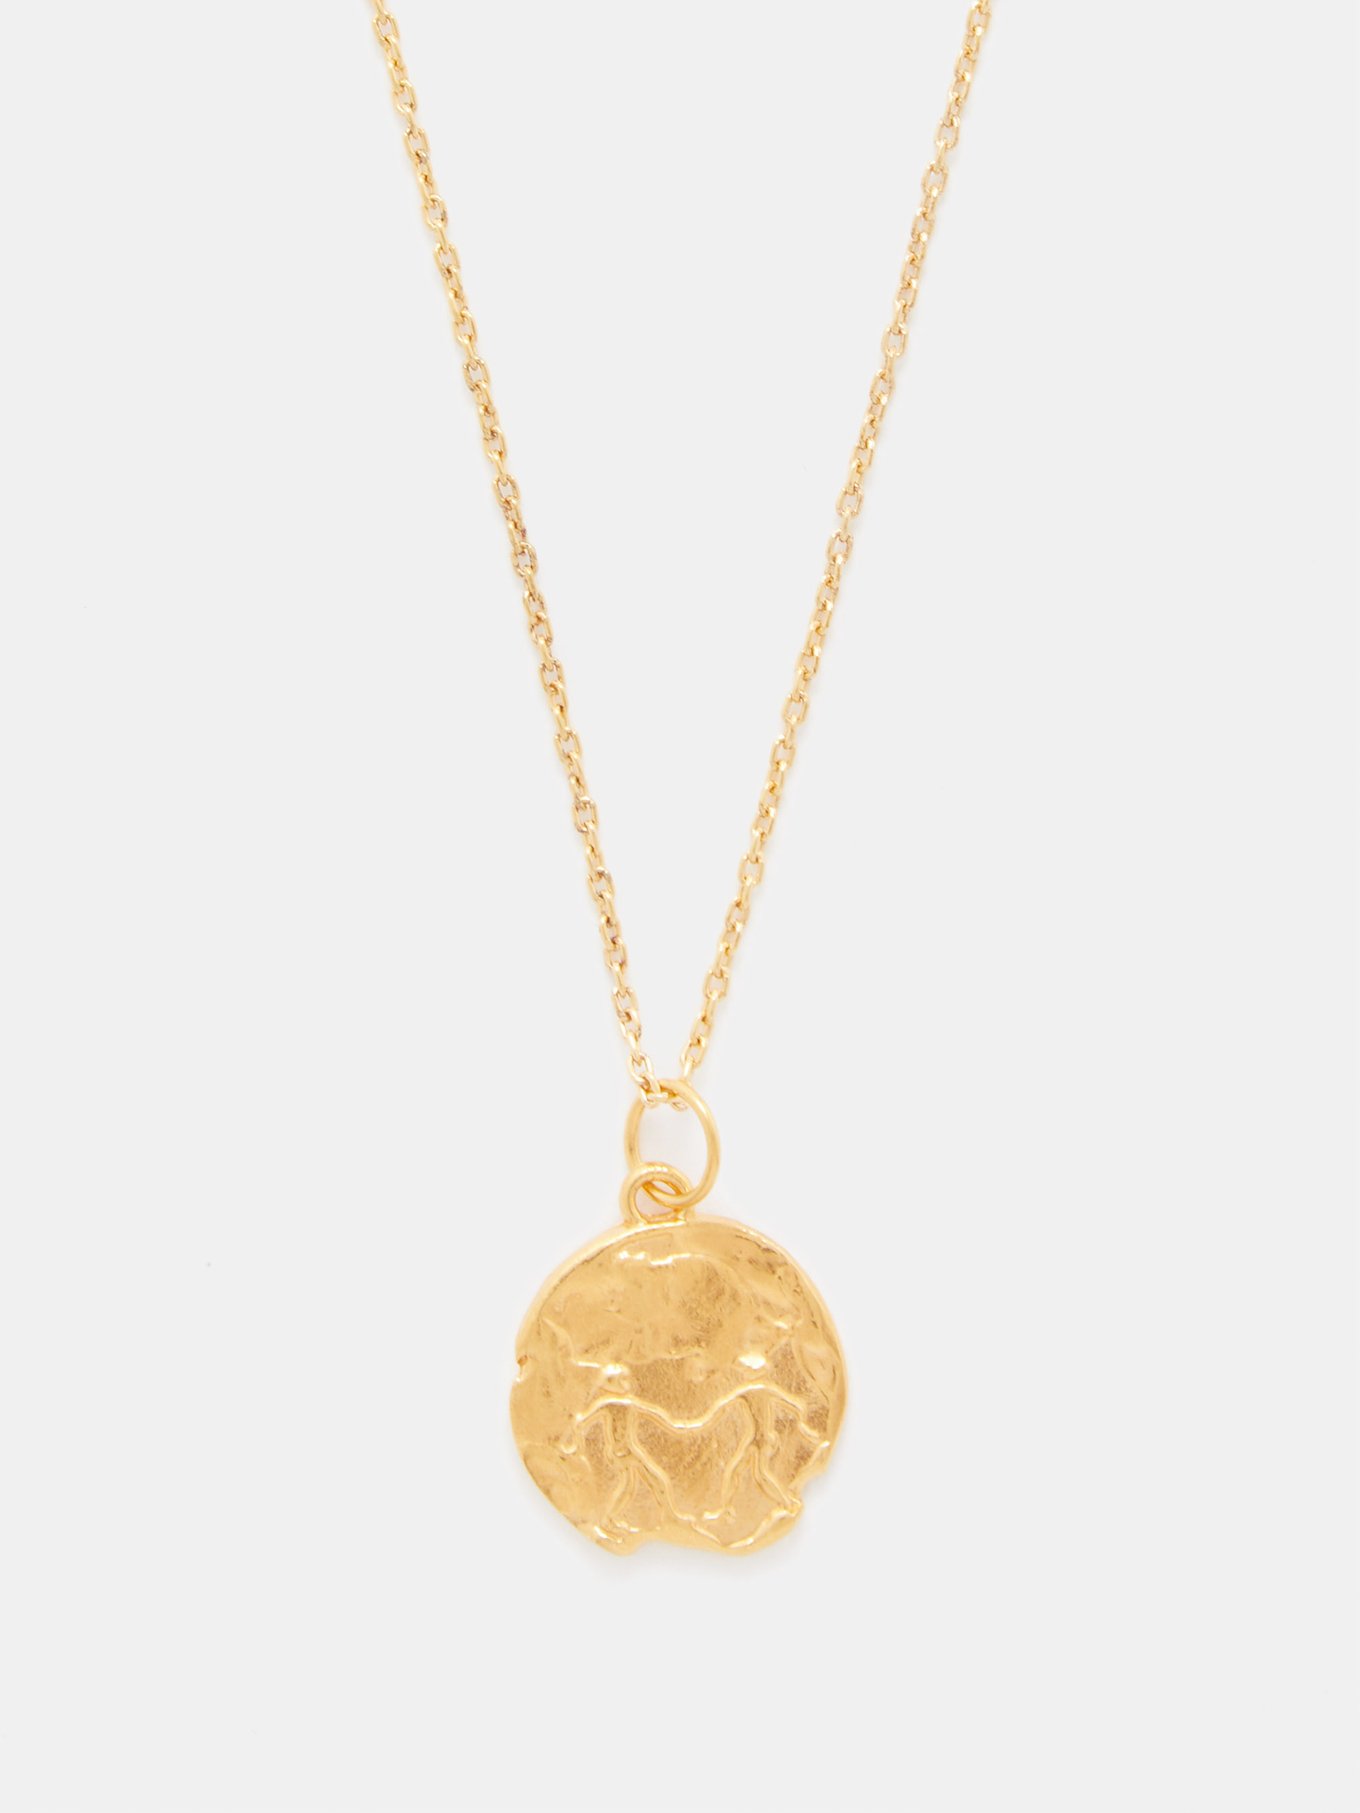 Gold Gemini gold-plated necklace | Alighieri | MATCHES UK